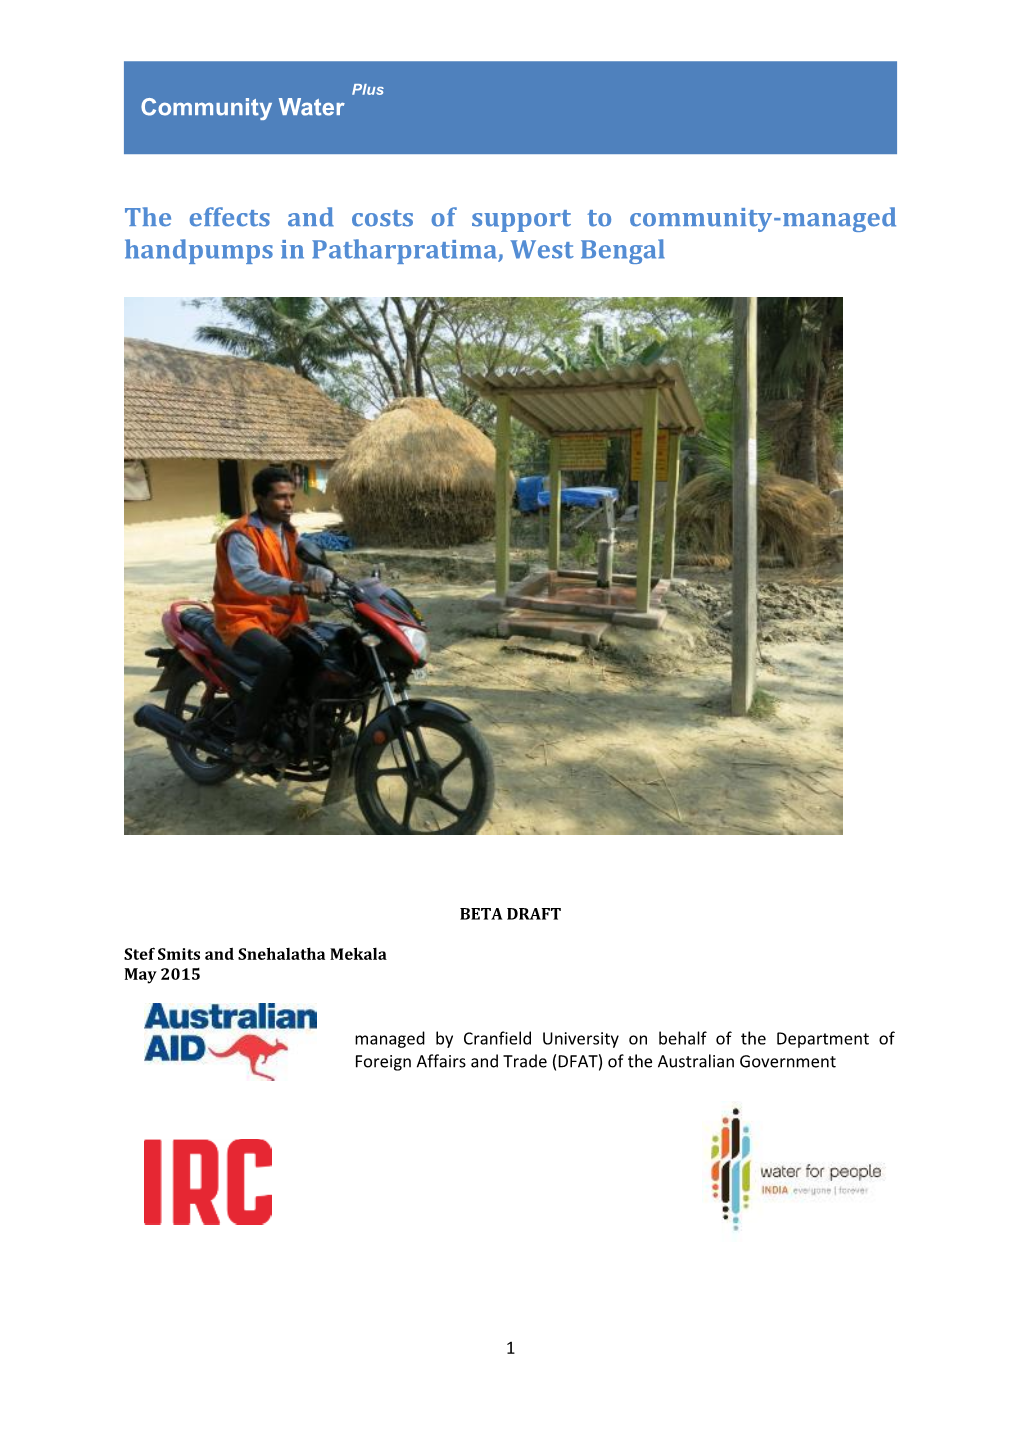 The Effects and Costs of Support to Community-Managed Handpumps in Patharpratima, West Bengal